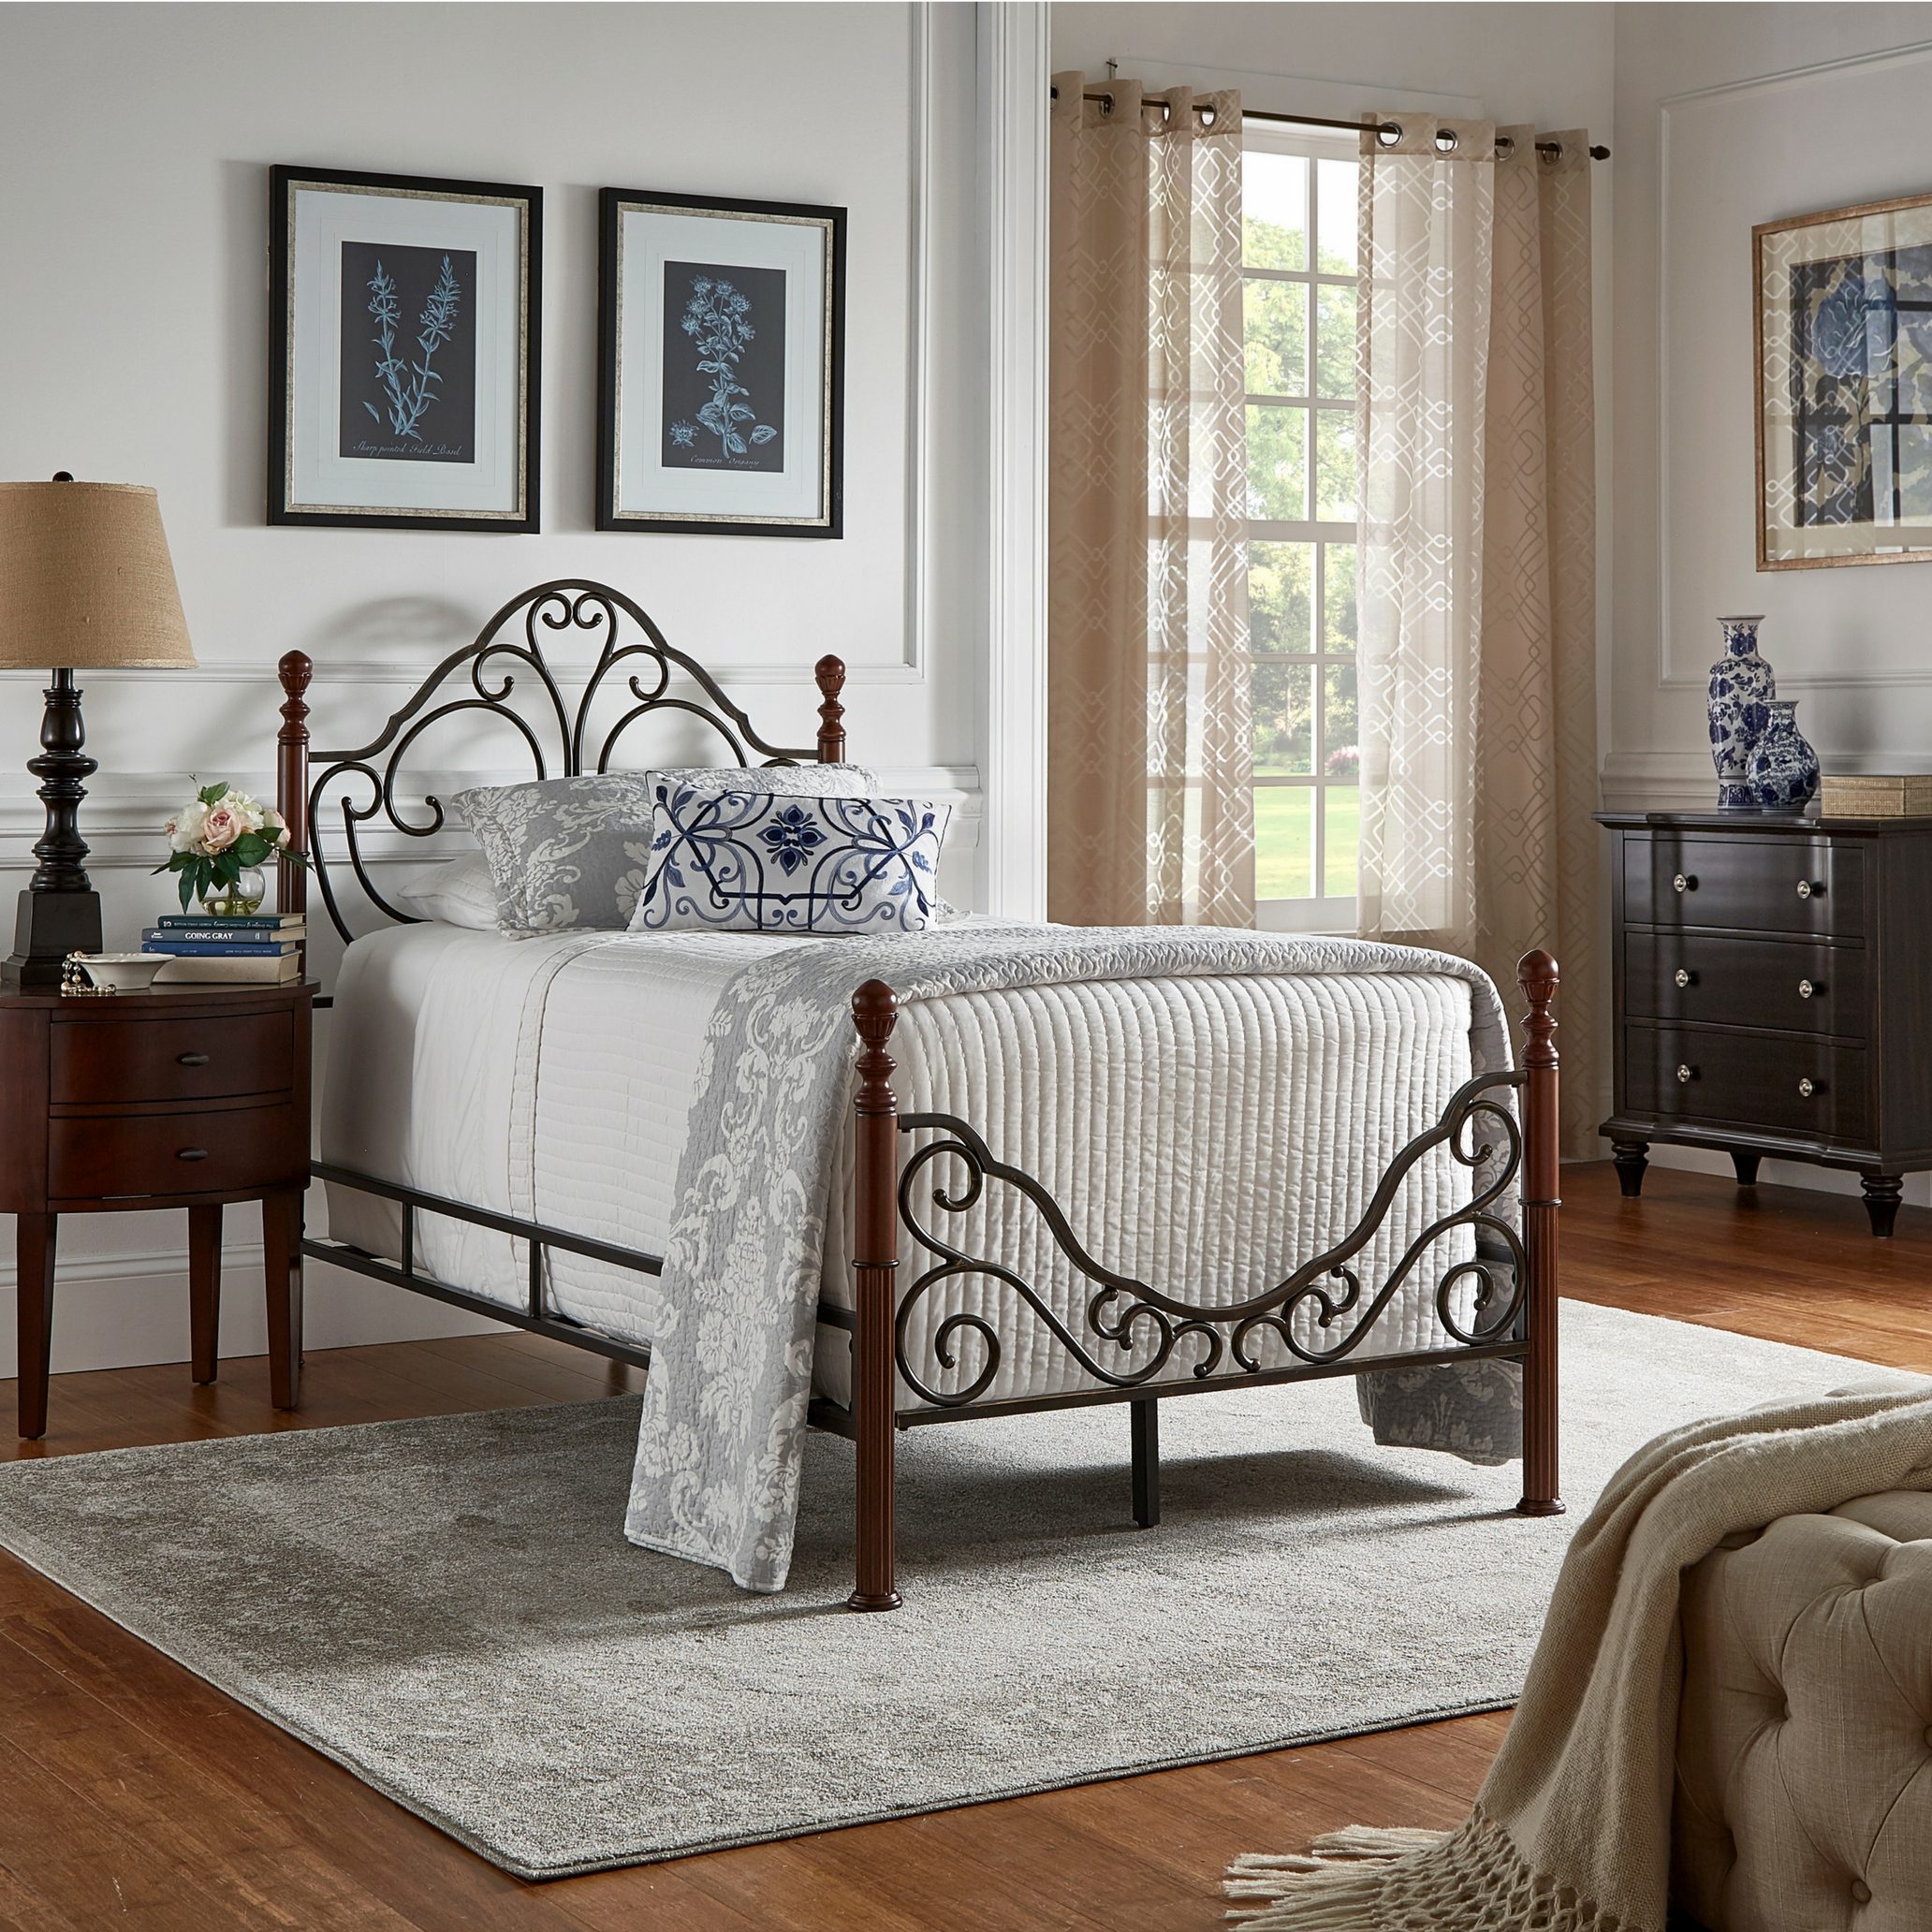 This guest room features a beautiful antique bronze metal bed with beautiful scroll work done on the head and footboards. The bed is dressed with white, grey, and blue bedding with plenty of pillows to go around.